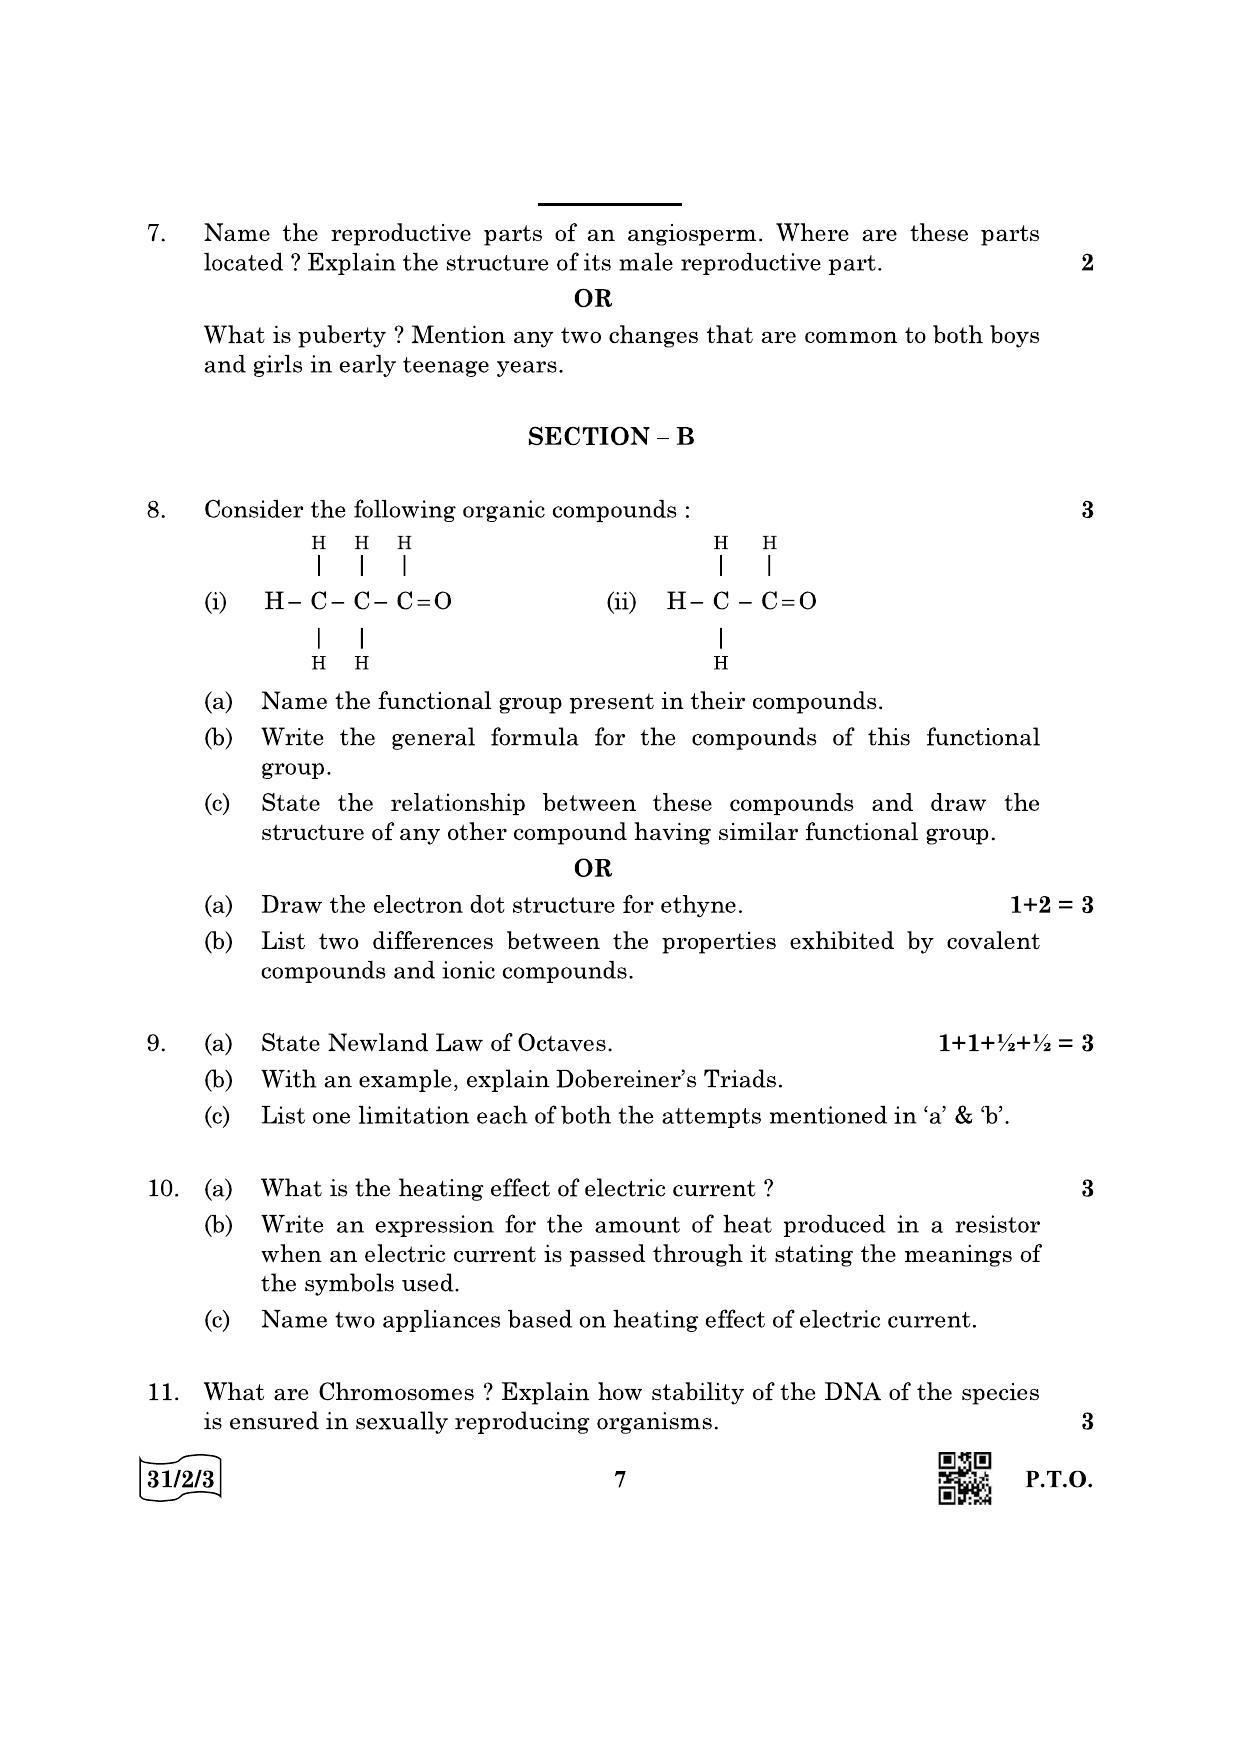 CBSE Class 10 31-2-3 Science 2022 Question Paper - Page 7